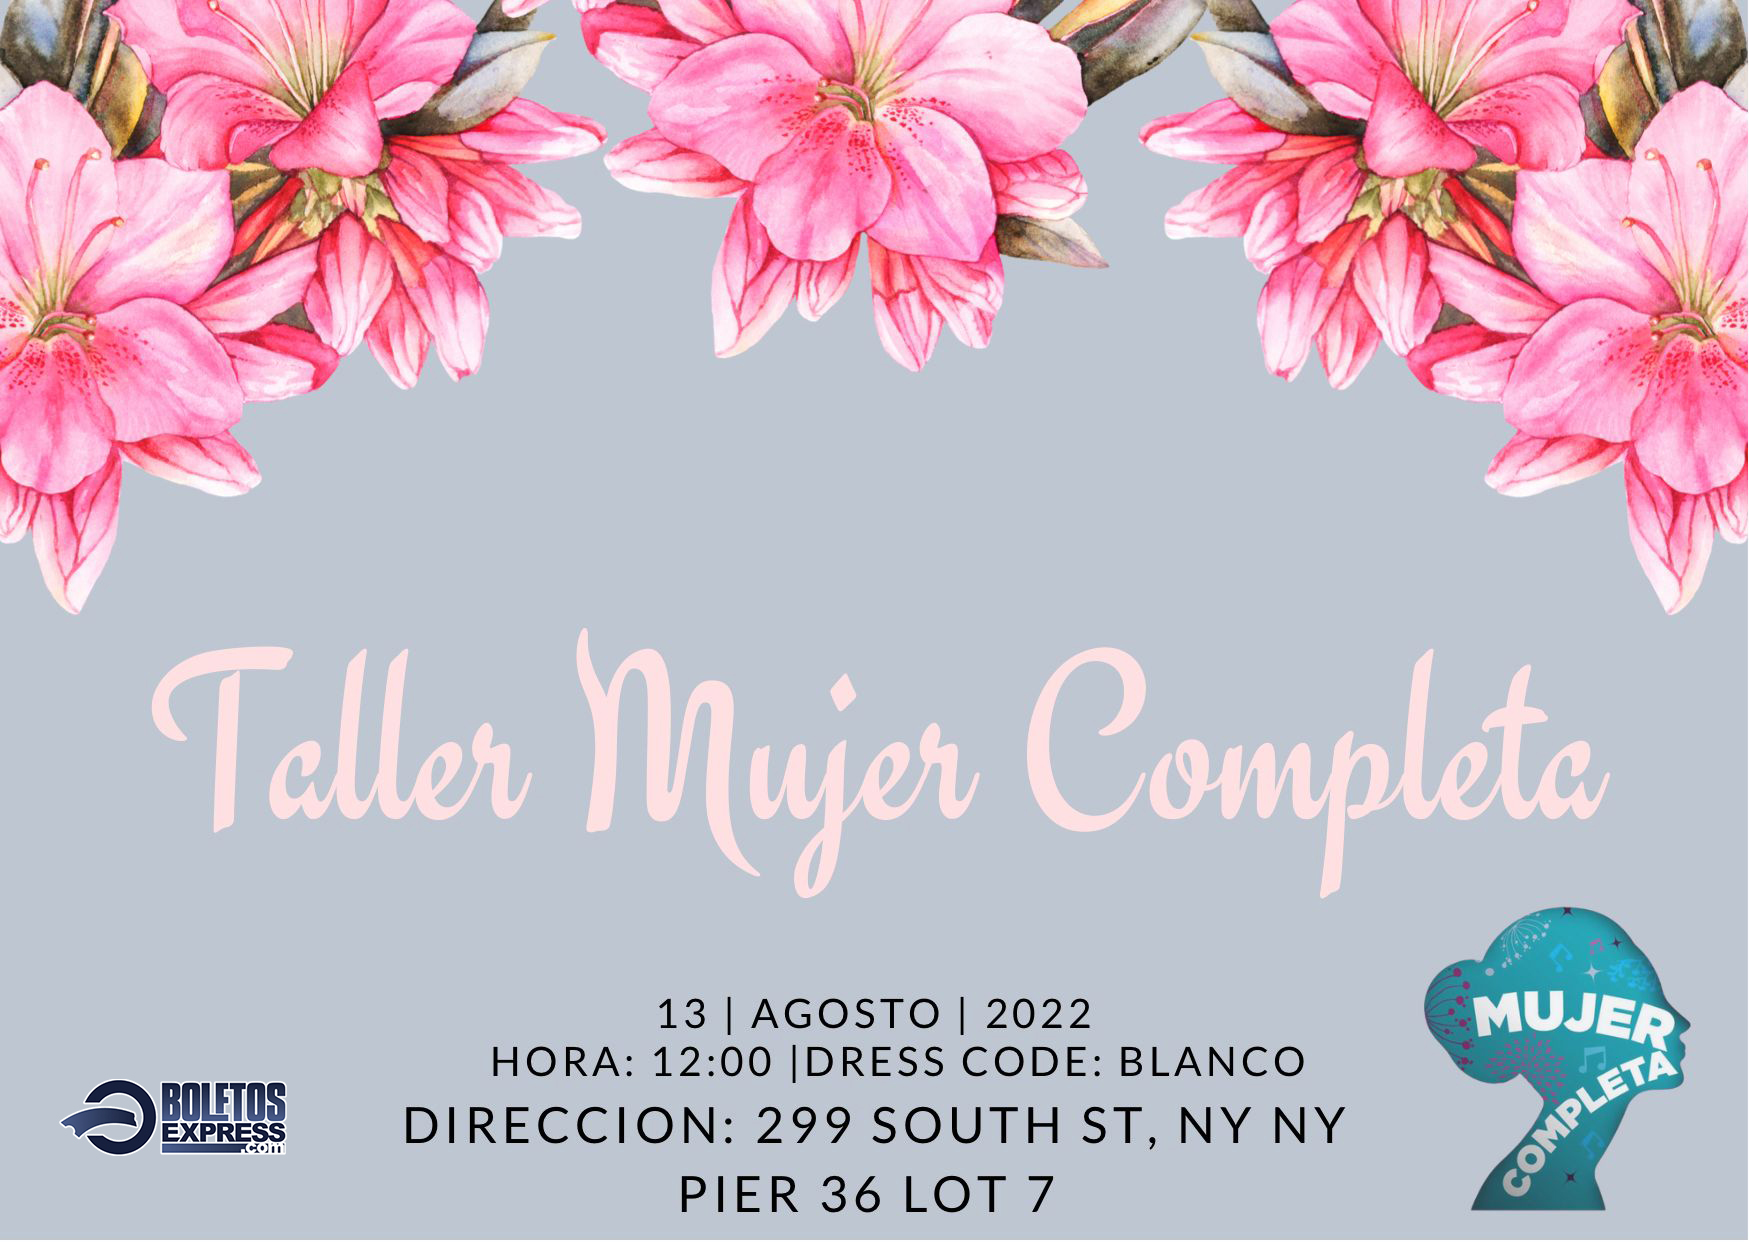 MUJER COMPLETA